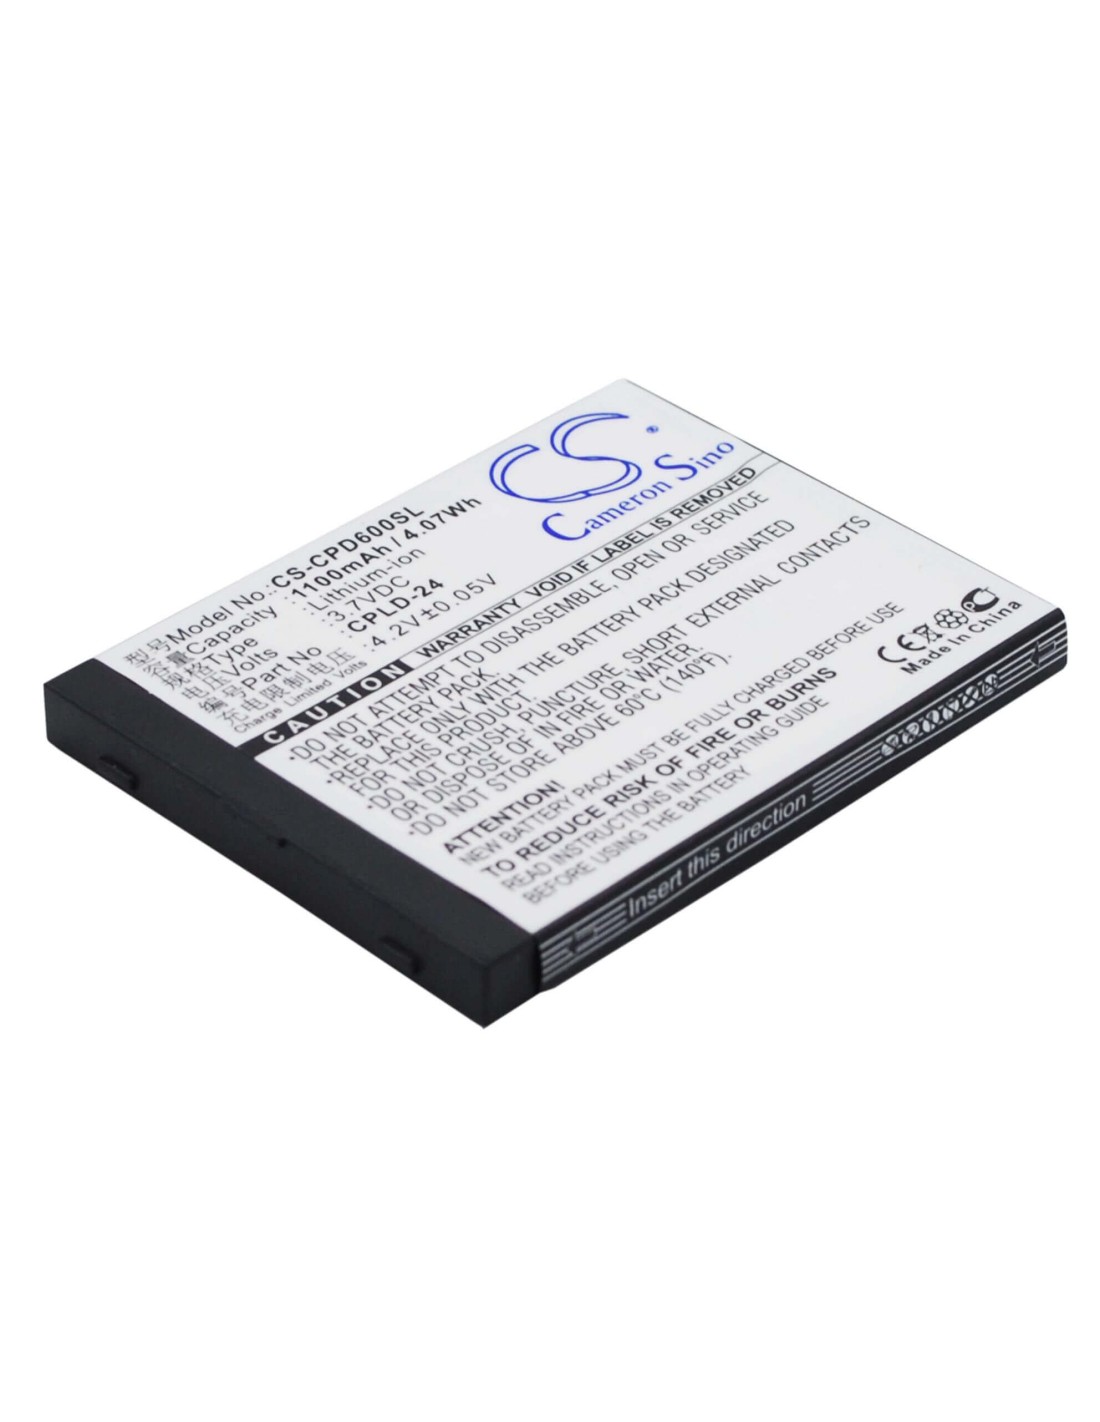 Battery for Coolpad 2938, D60 3.7V, 1100mAh - 4.07Wh